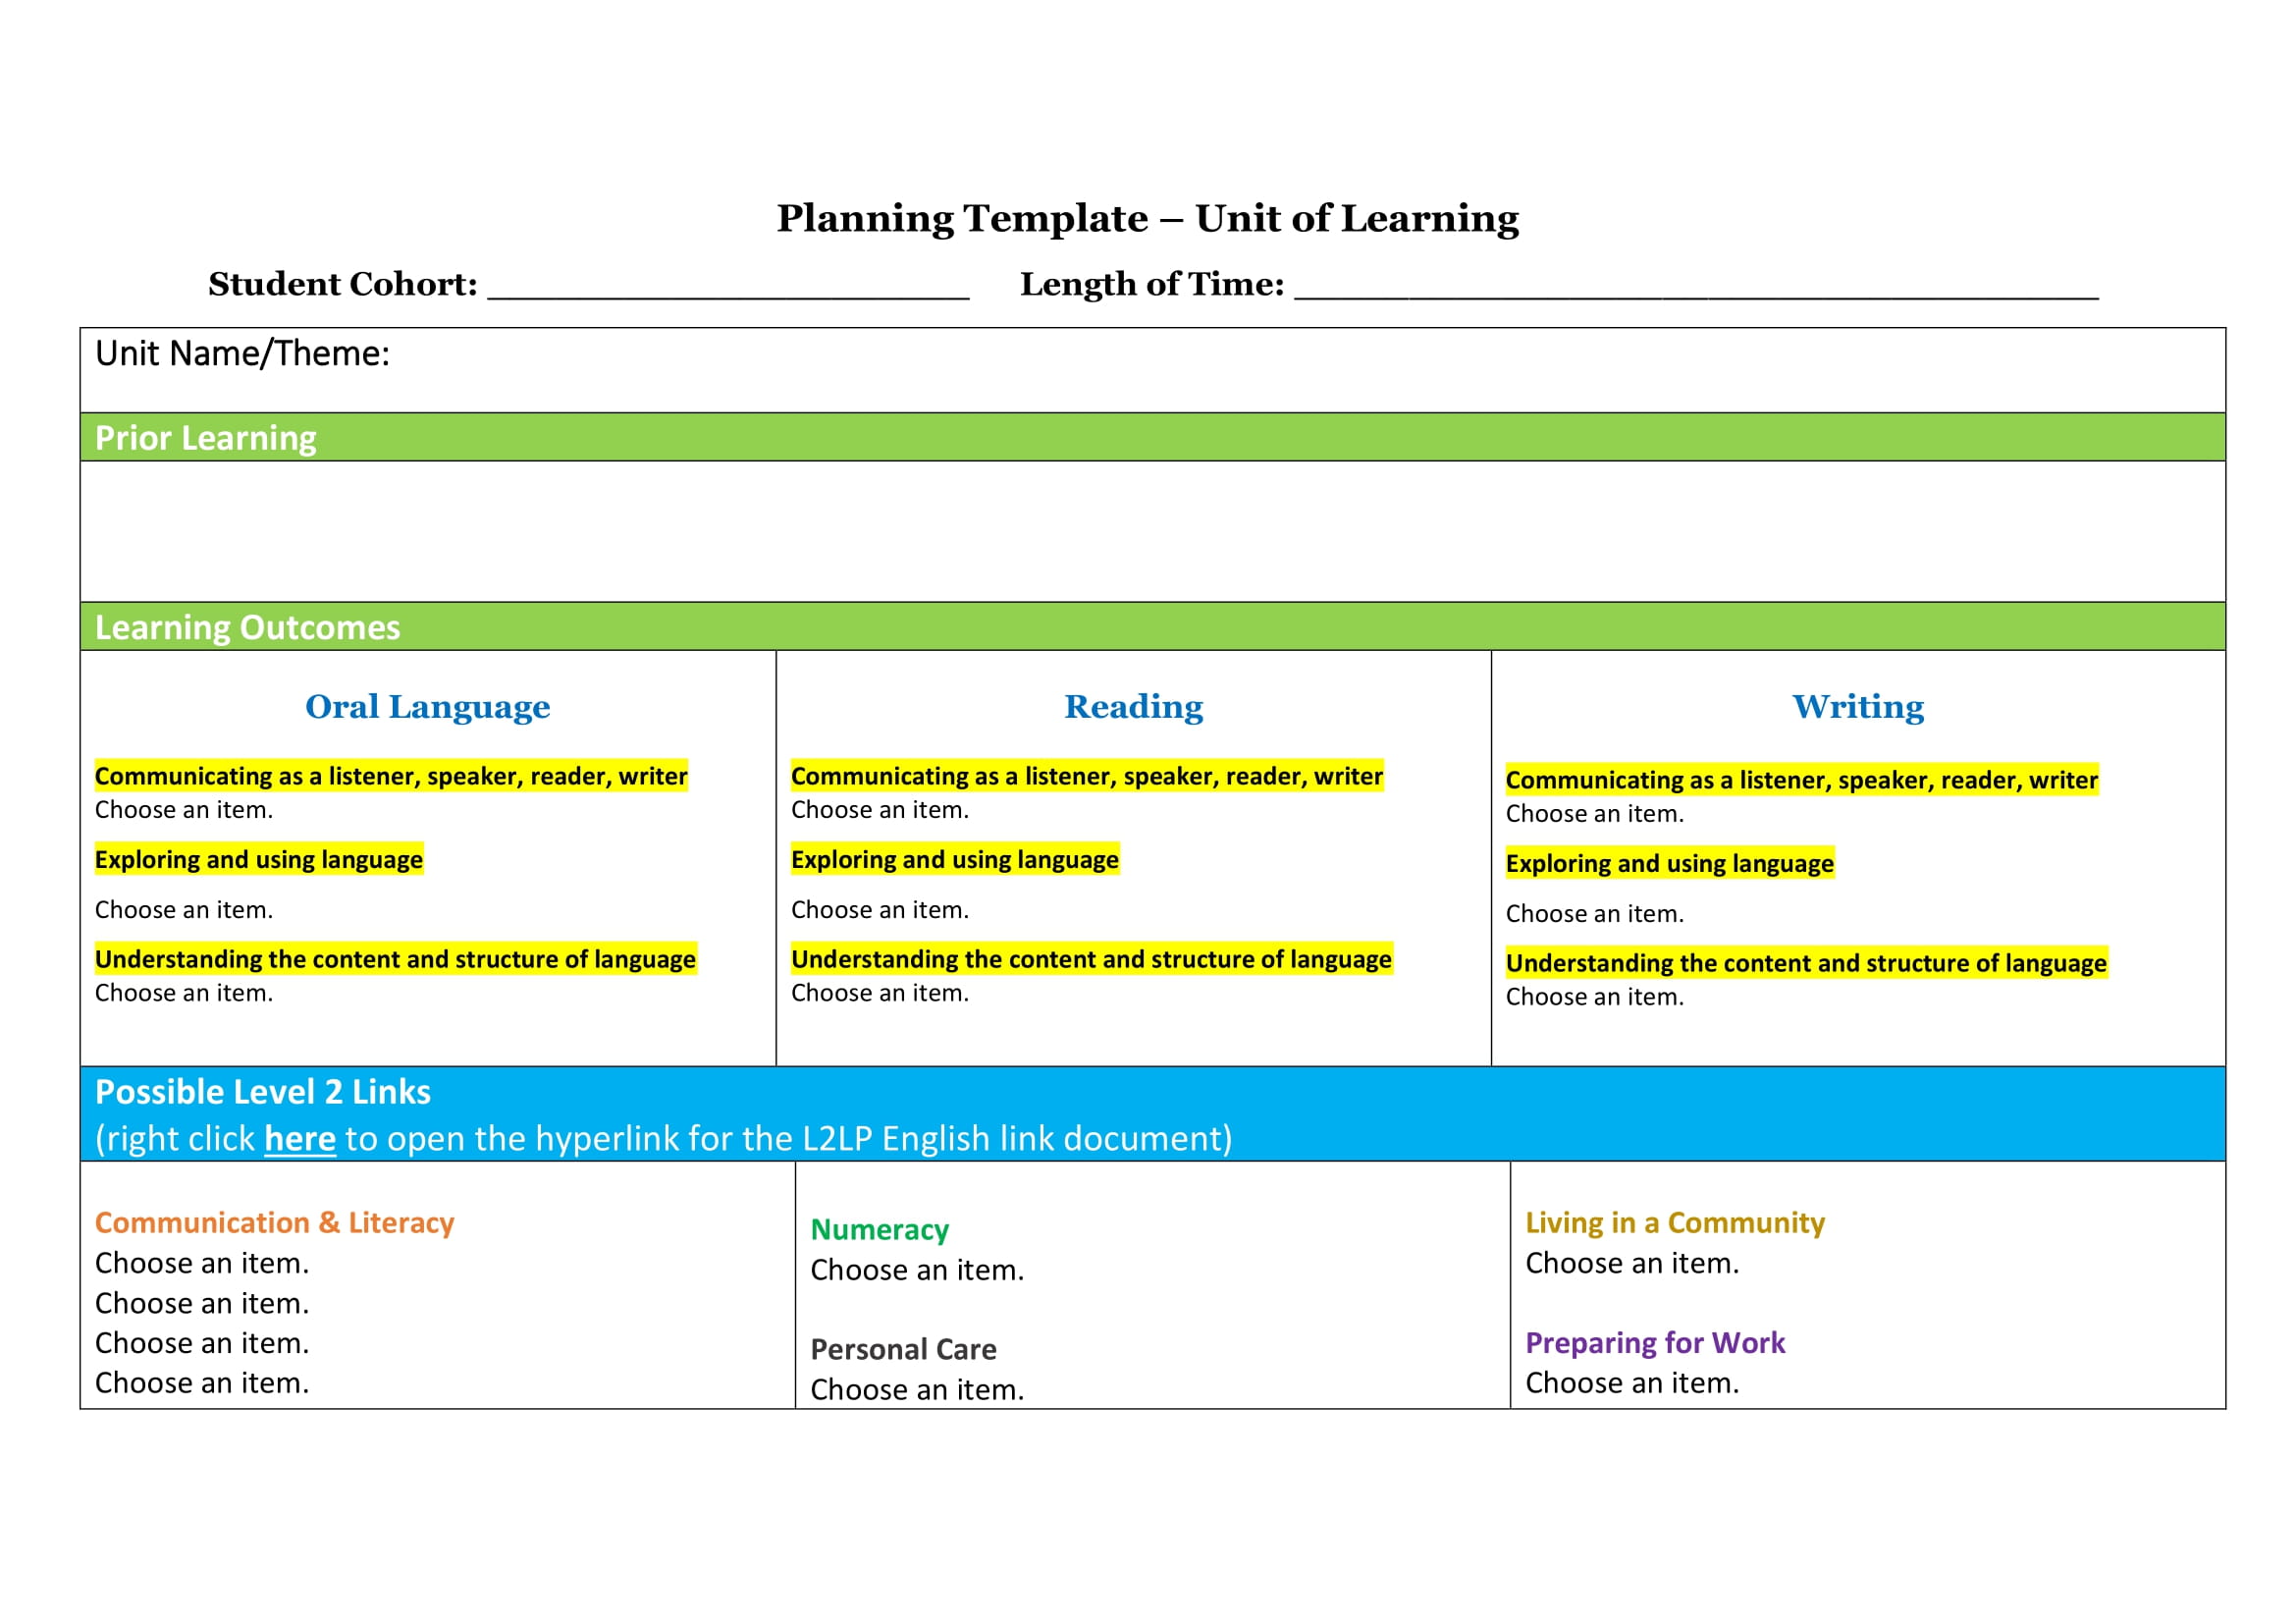 Interactive Planning Template with L2LP - Landscape